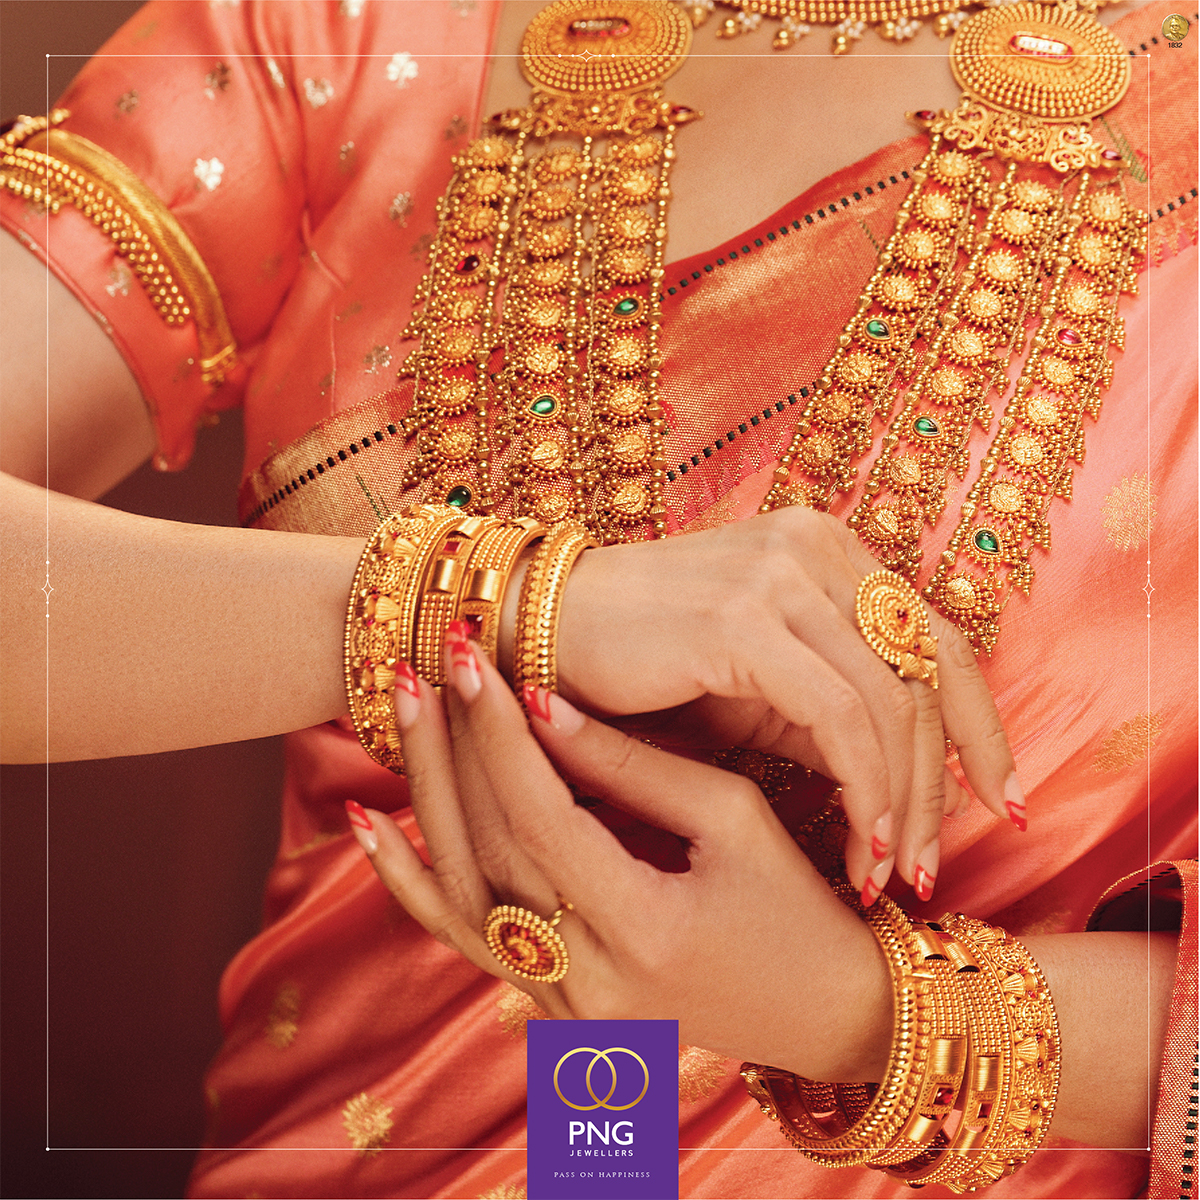 Add a touch of elegance to your personality with our stunning gold bangles. From simple to contemporary, we have something for everyone!
.
.
.
#goldbangles #bangles #goldjewellery #goldcollection #traditionaljewellery #traditionalbangles #bangle #pngjewellers #swarajyacollection